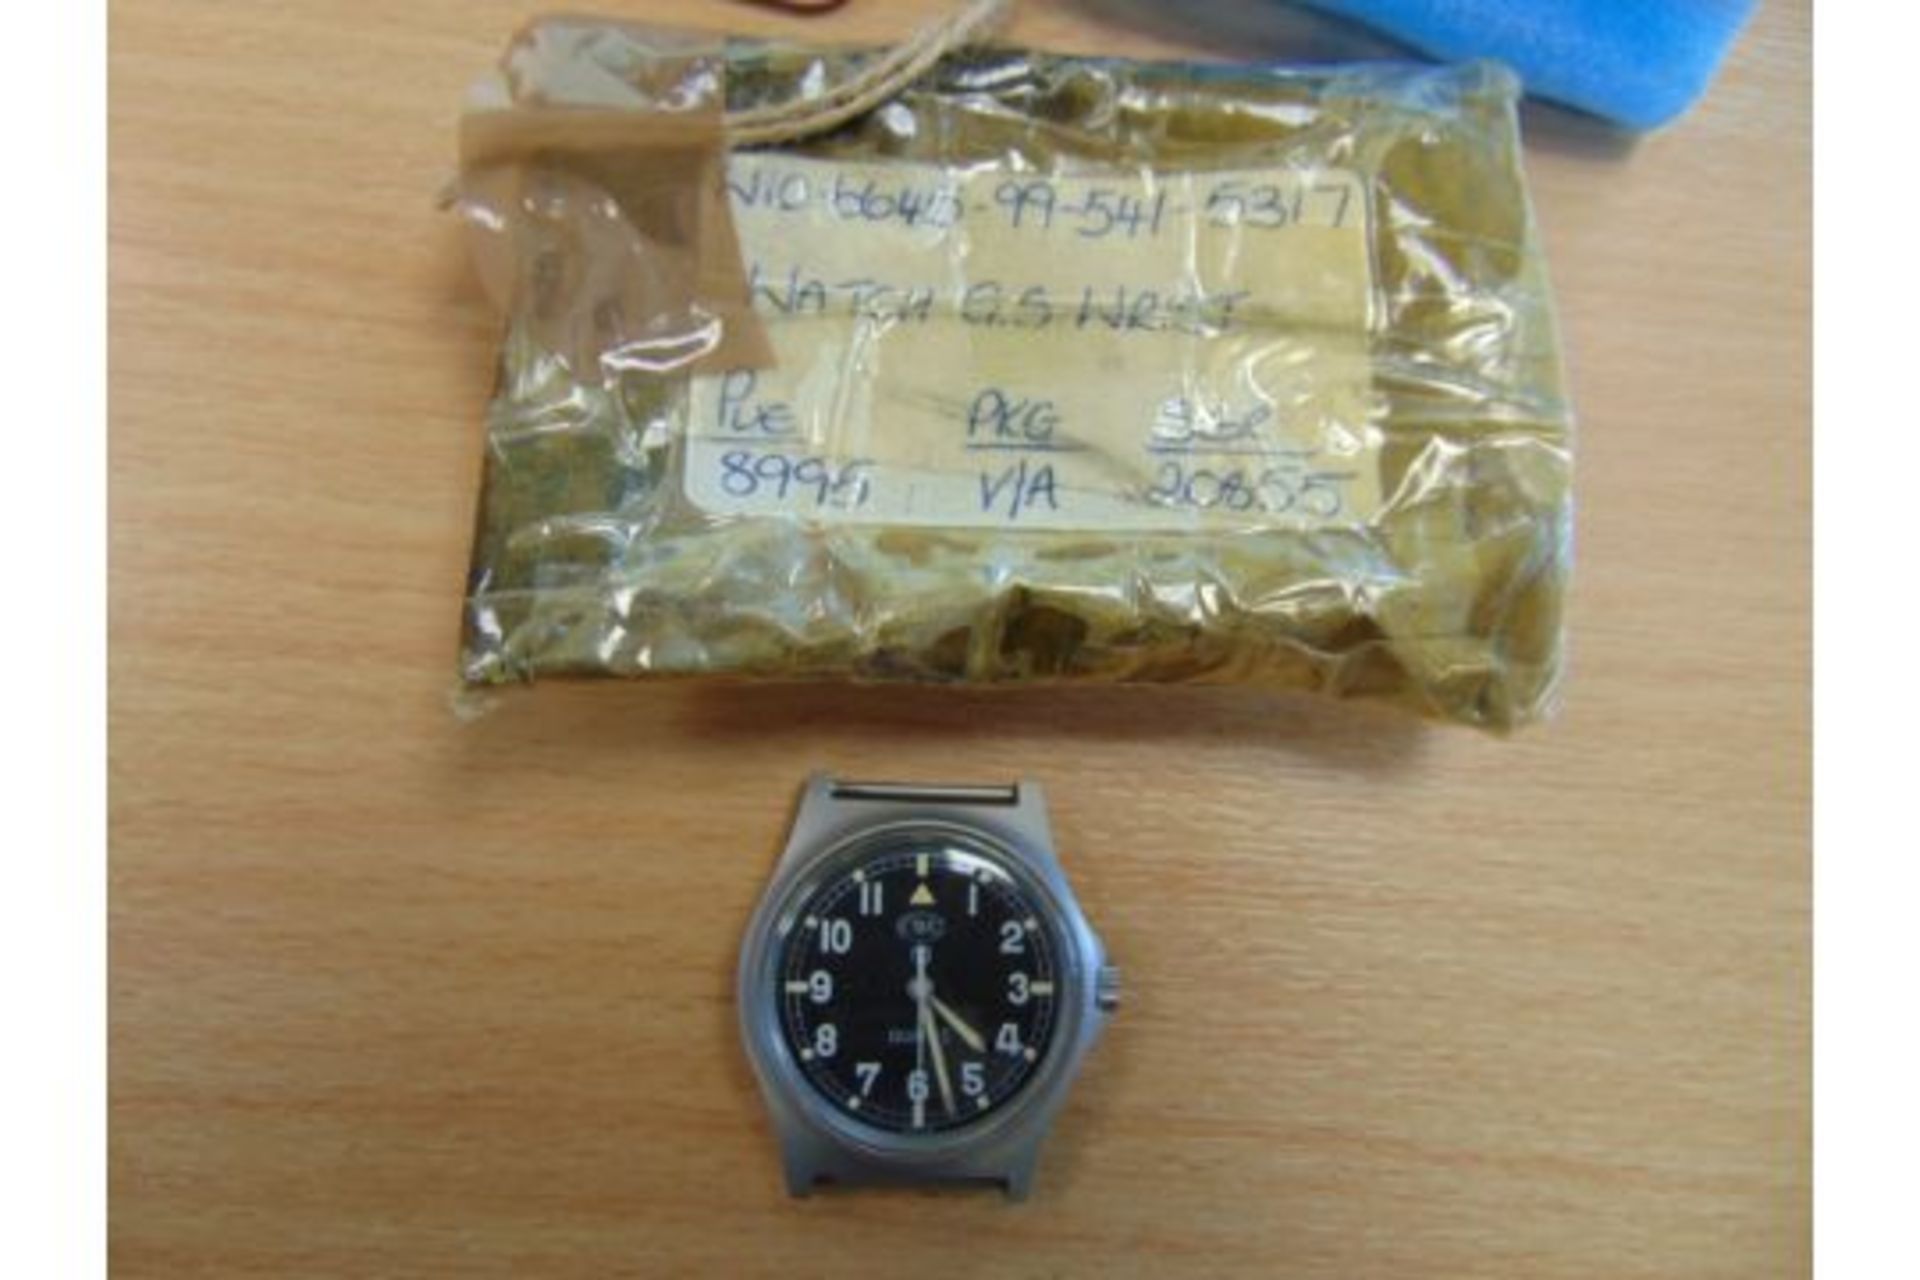 V Rare Unissued FAT BOY CWC (Cabot Watch Co Switzerland) British Army W10 Service Watch Dated 1983 - Image 3 of 5